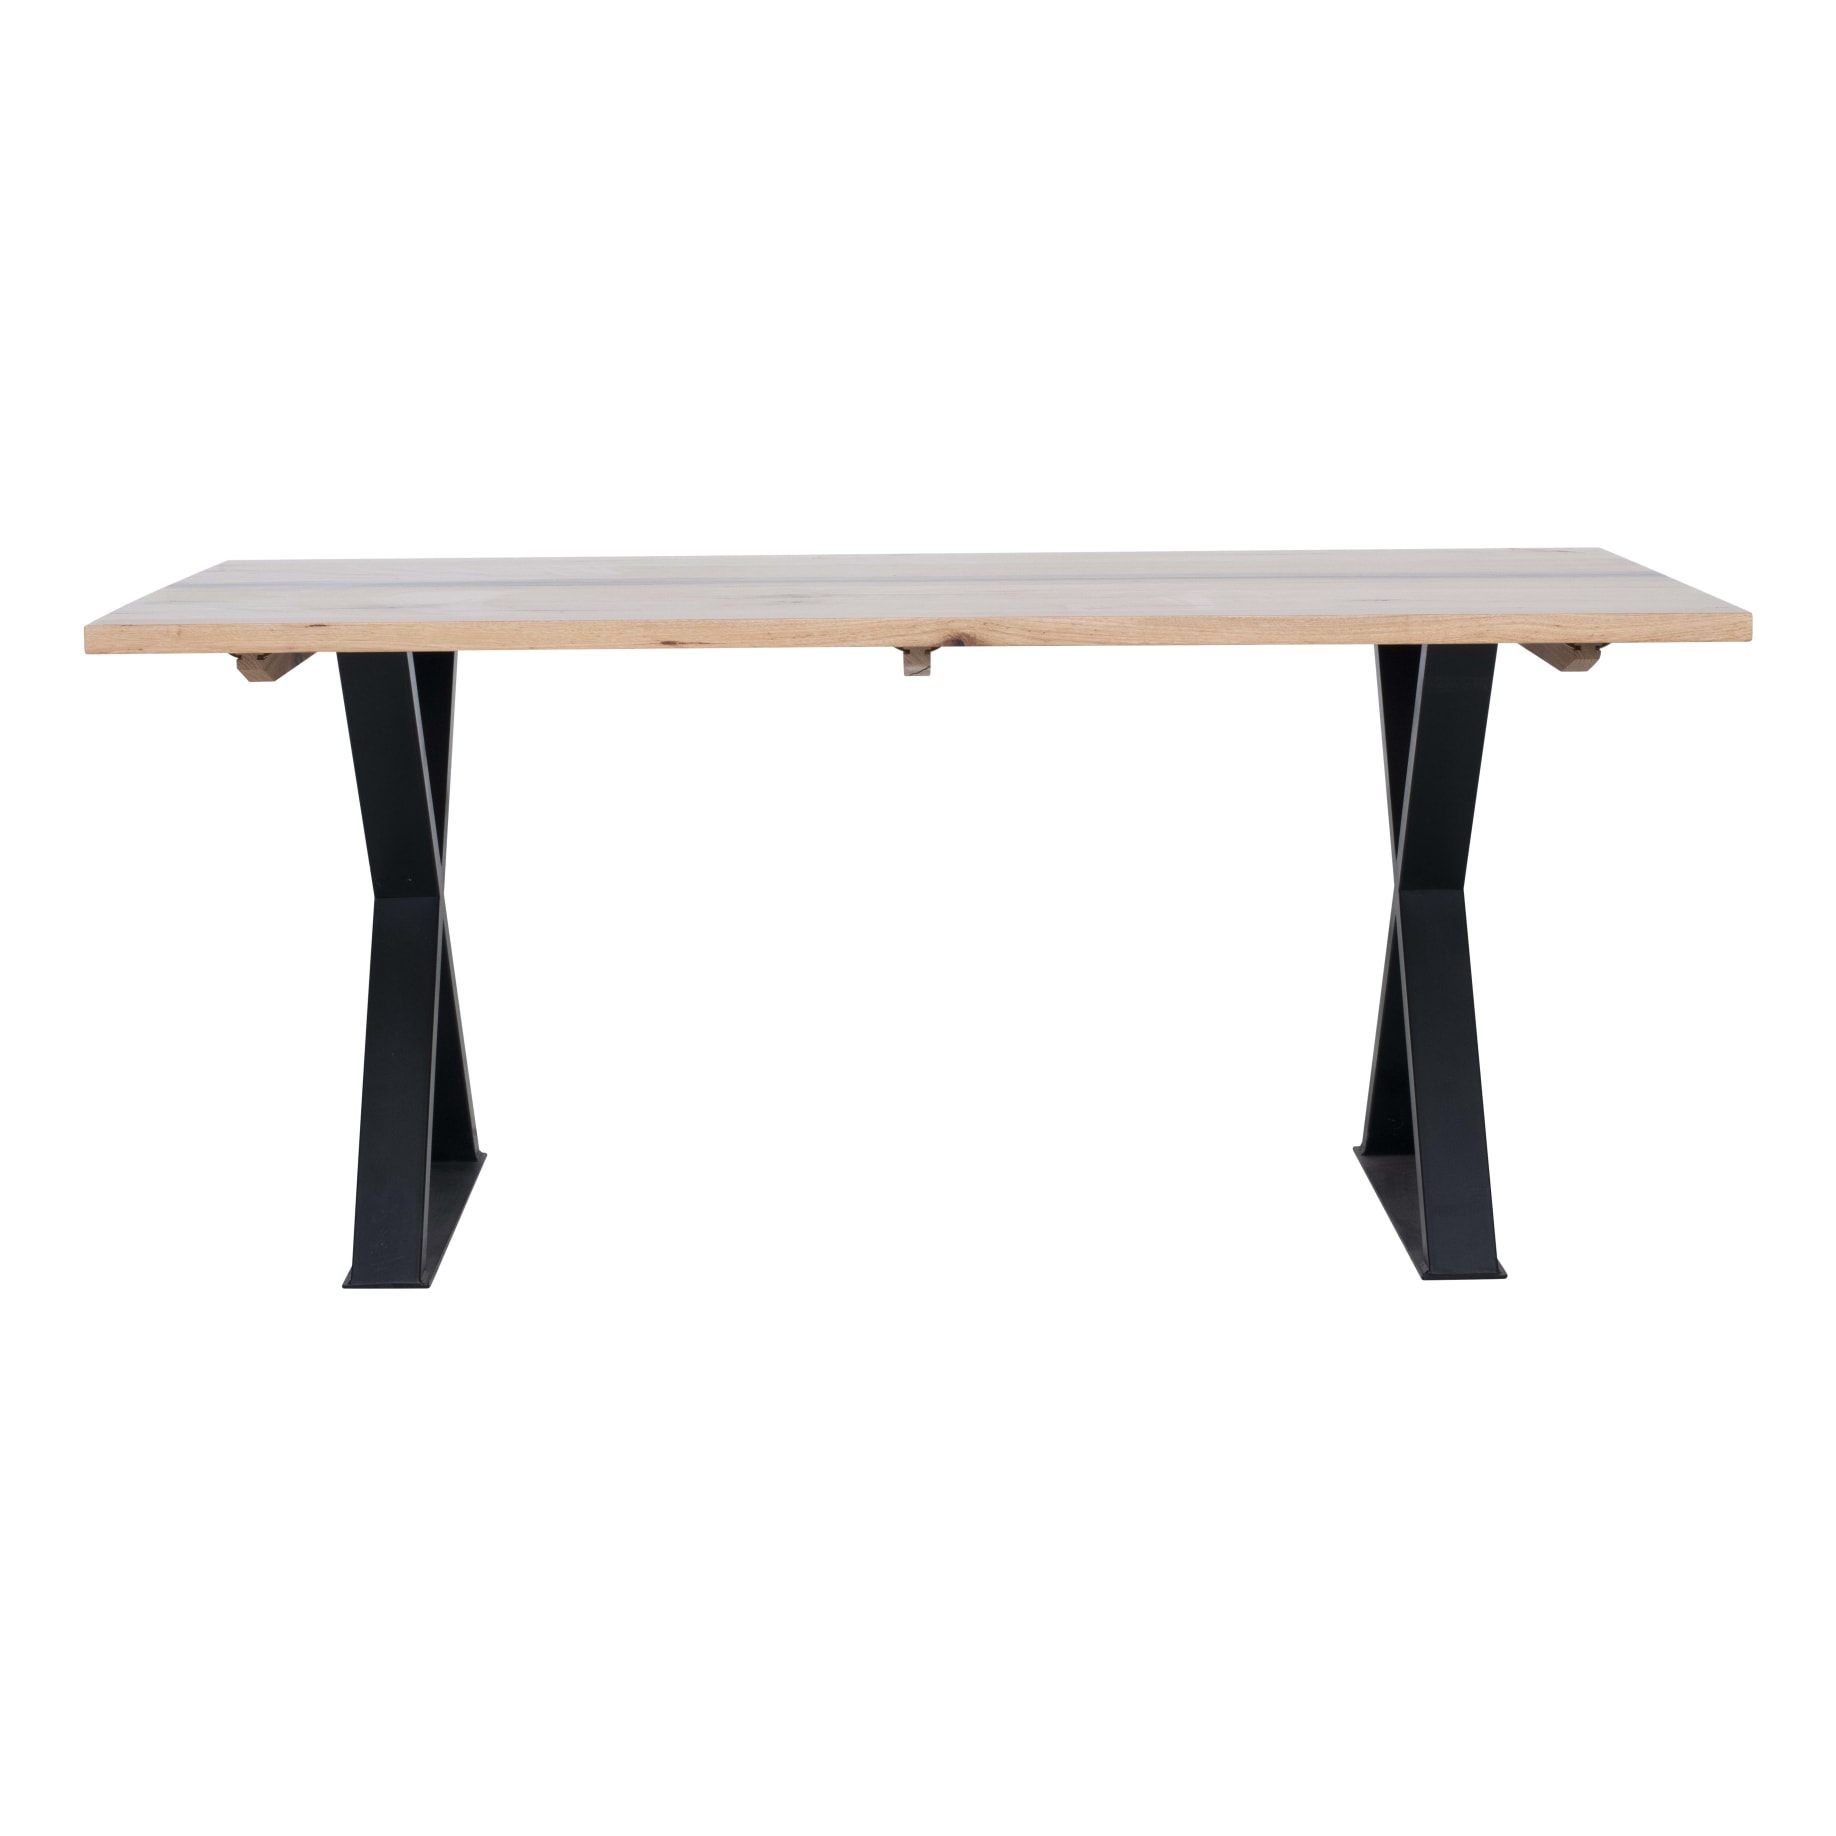 Rawson Dining Table 270cm in Messmate W/ Resin